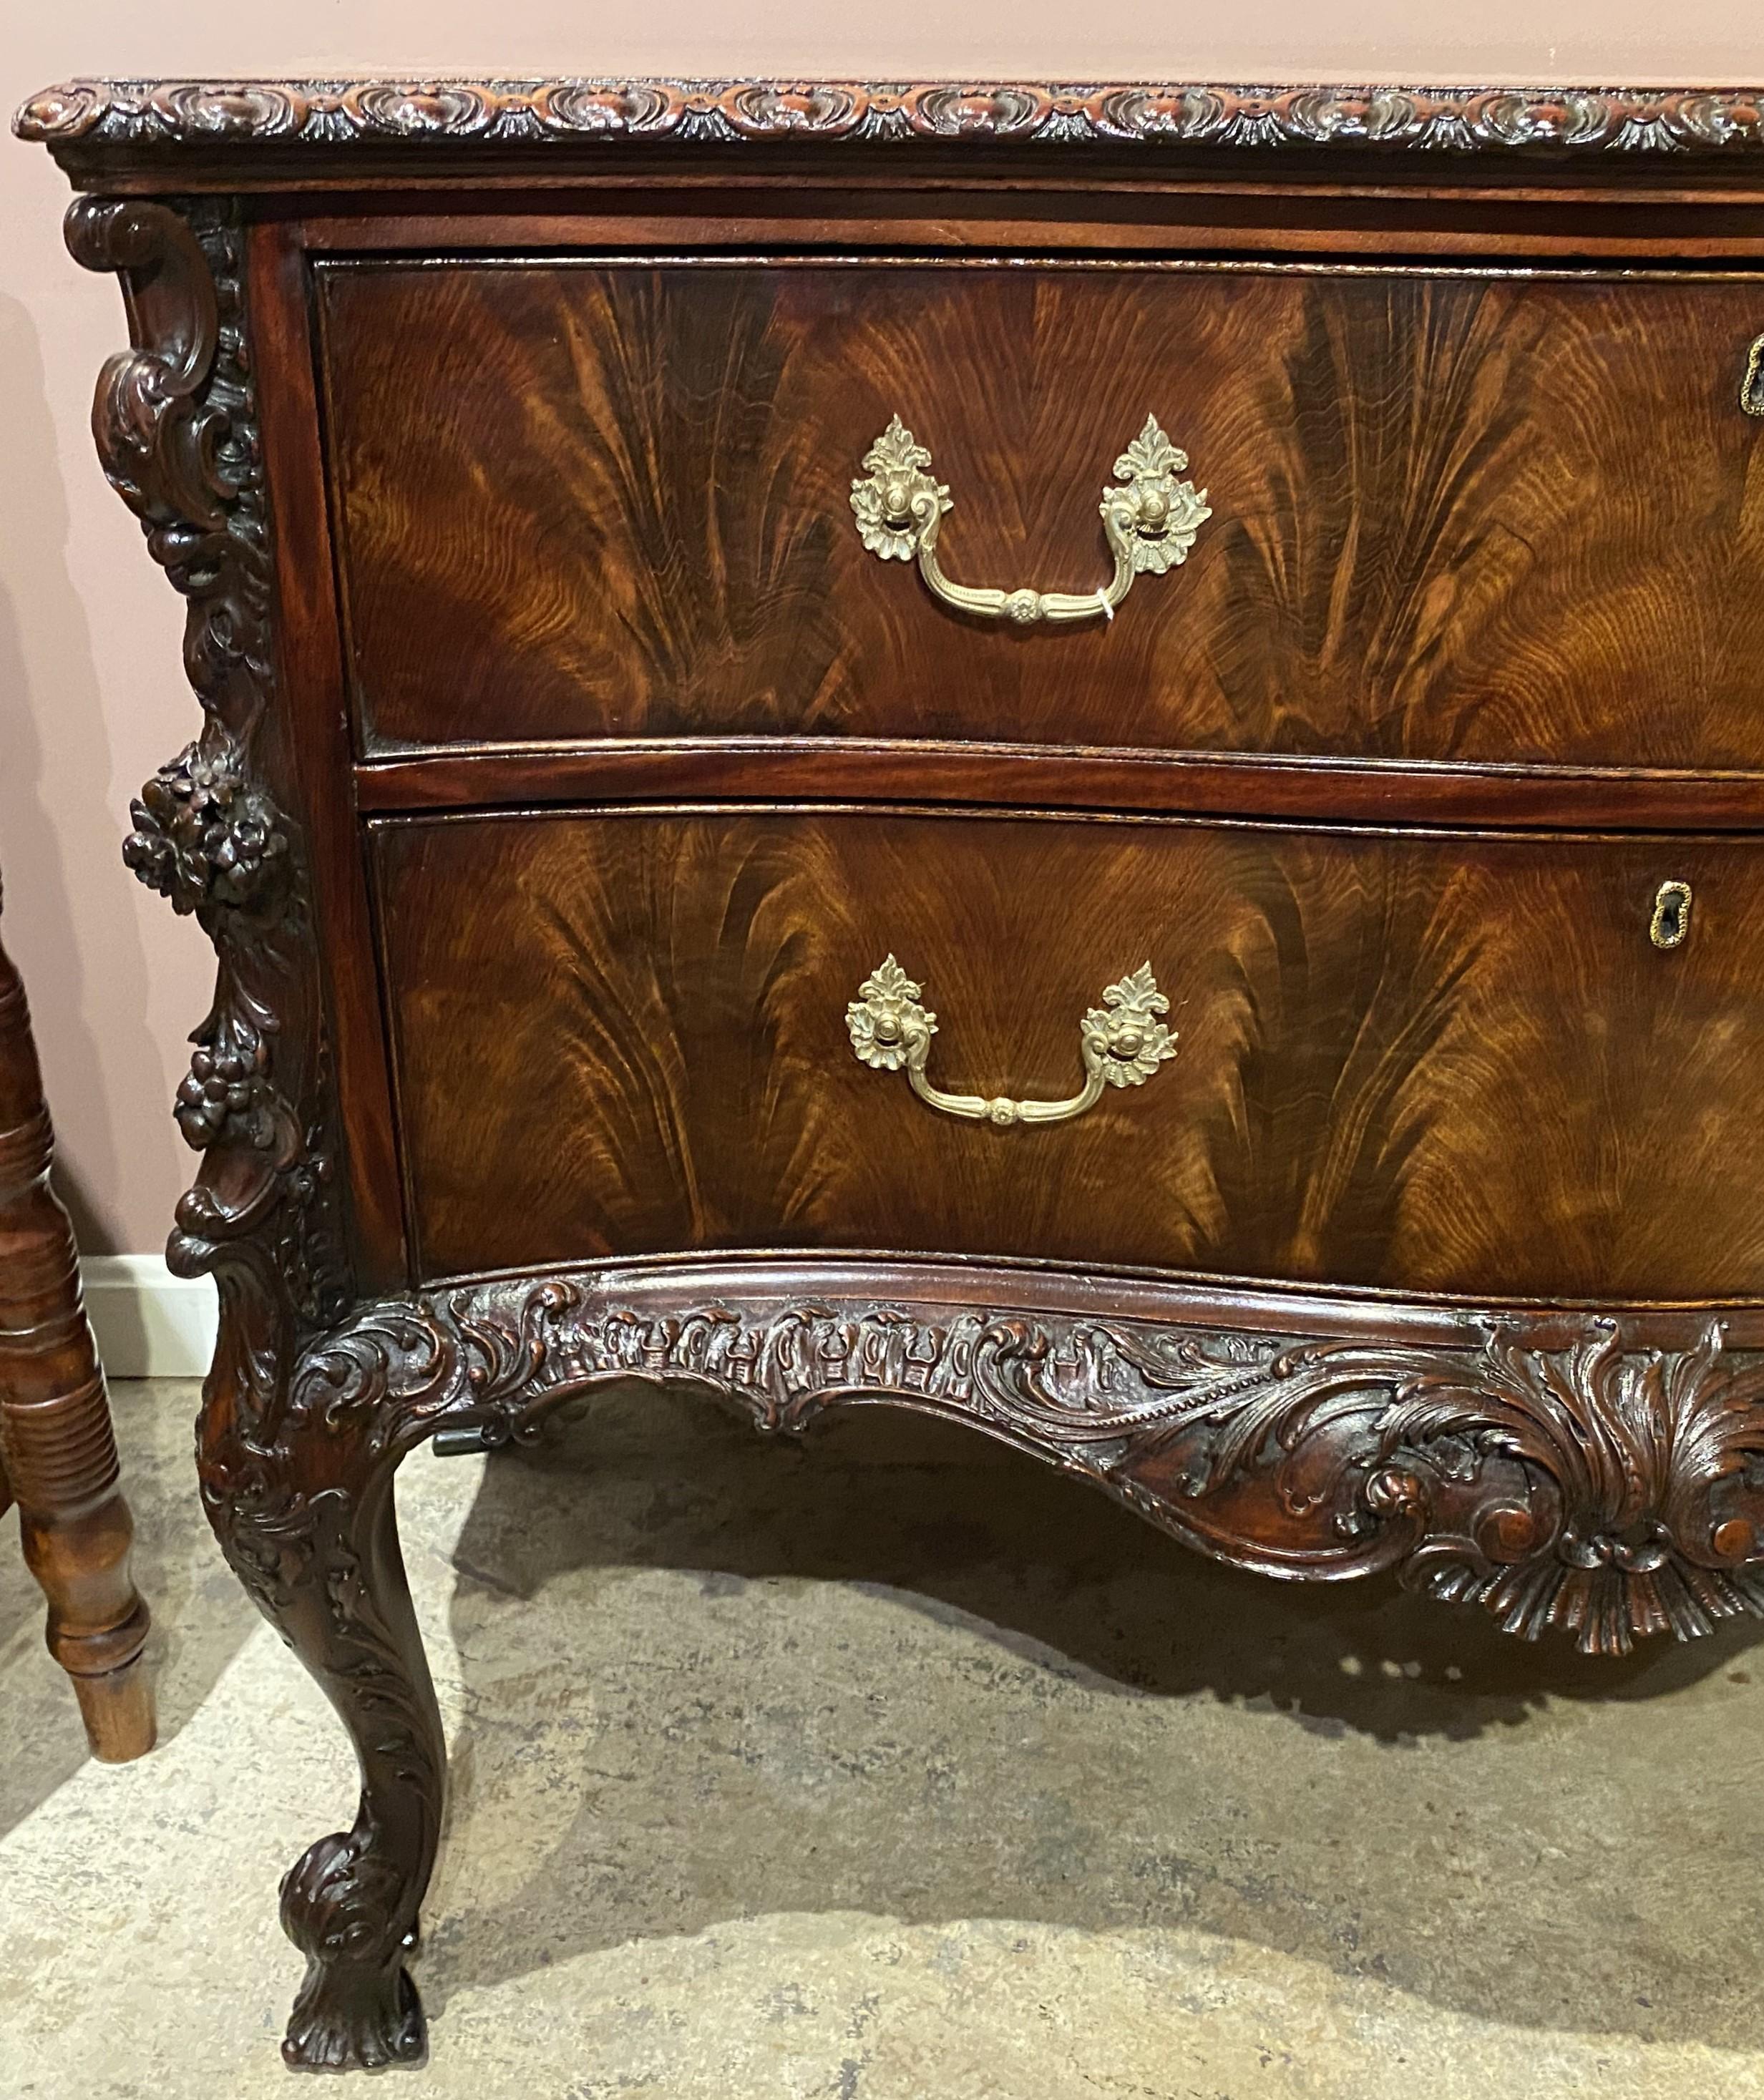 Rococo Revival Mahogany Heavily Carved 2 Drawer Commode in the Chippendale Taste In Good Condition For Sale In Milford, NH